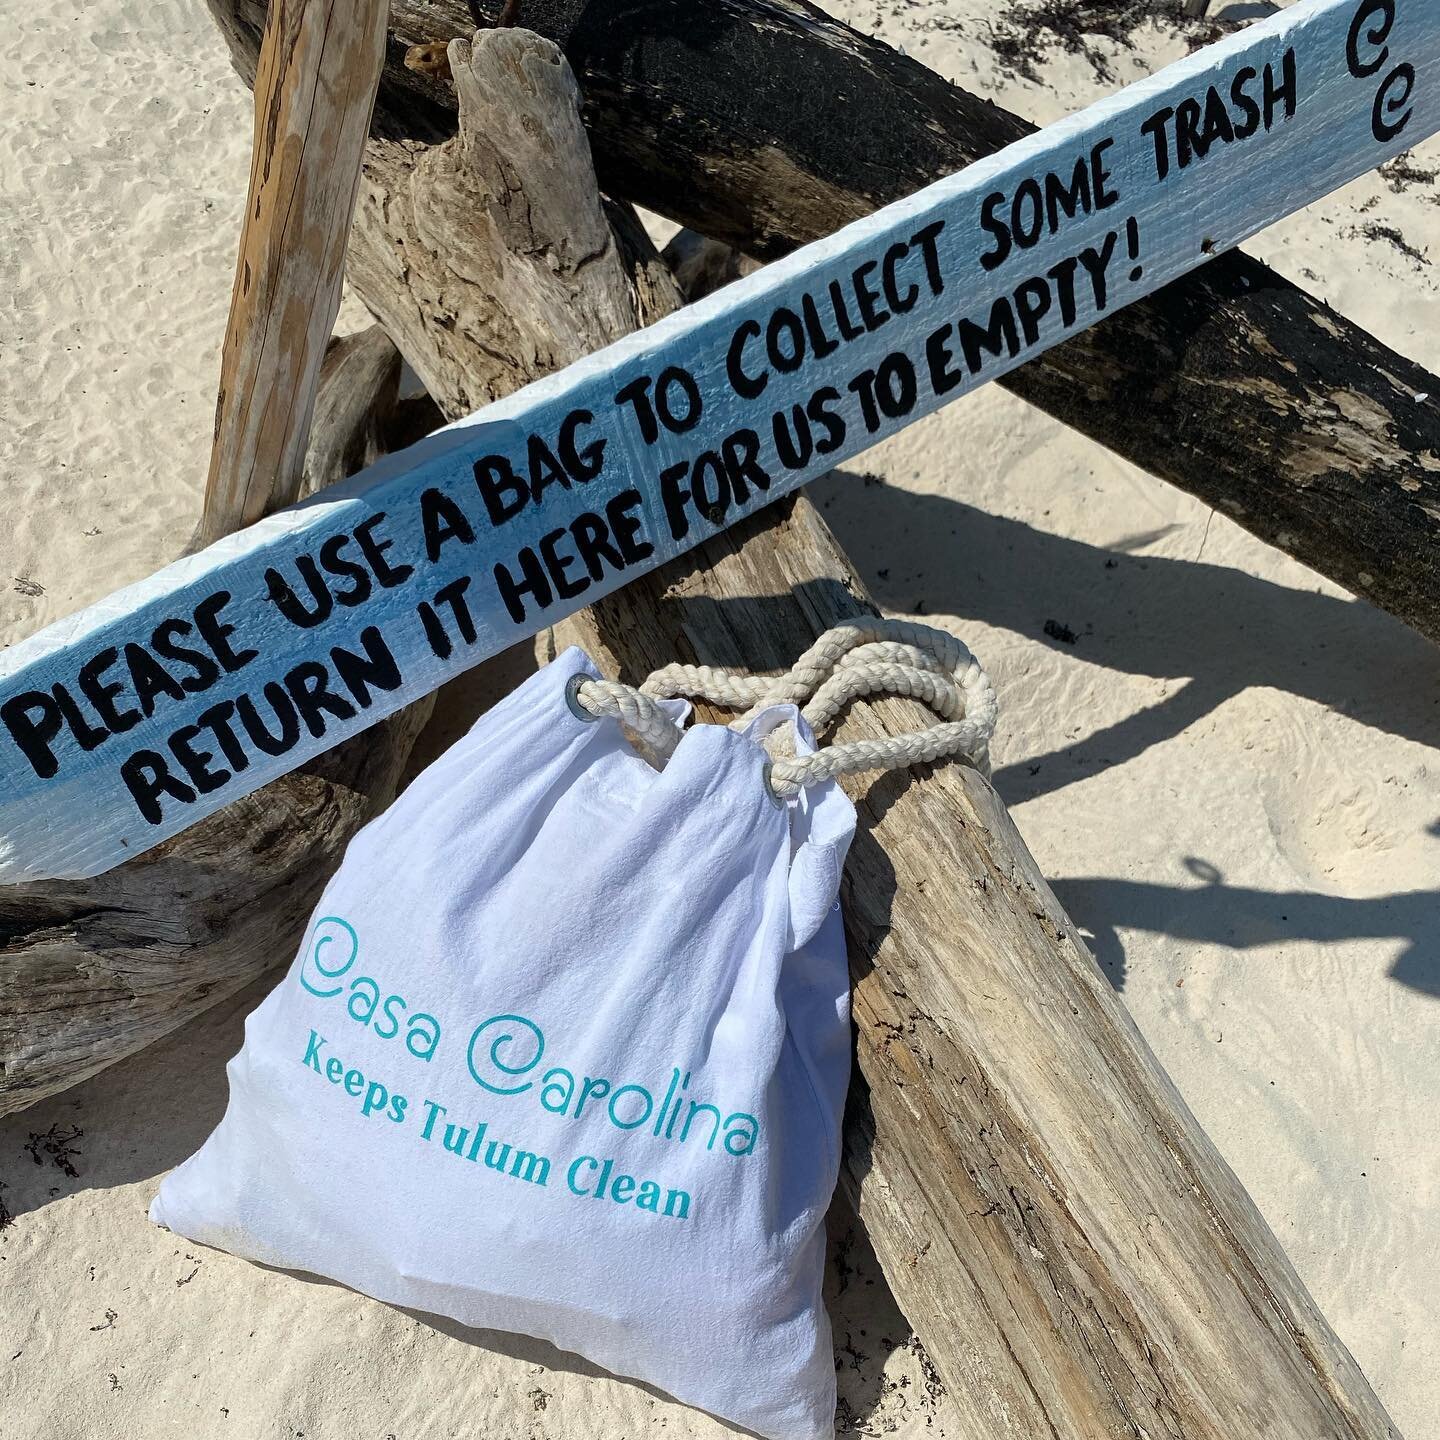 Thank you 🙏🏼 to everyone helping to  keep our paradise clean. The baby turtles who hatched  next to our sign ❤️ you. 🐢🐢
.
.
. 
#littlebylittle #workingtogether #tulumbeach #paradise #carettacaretta #5minutebeachcleanup